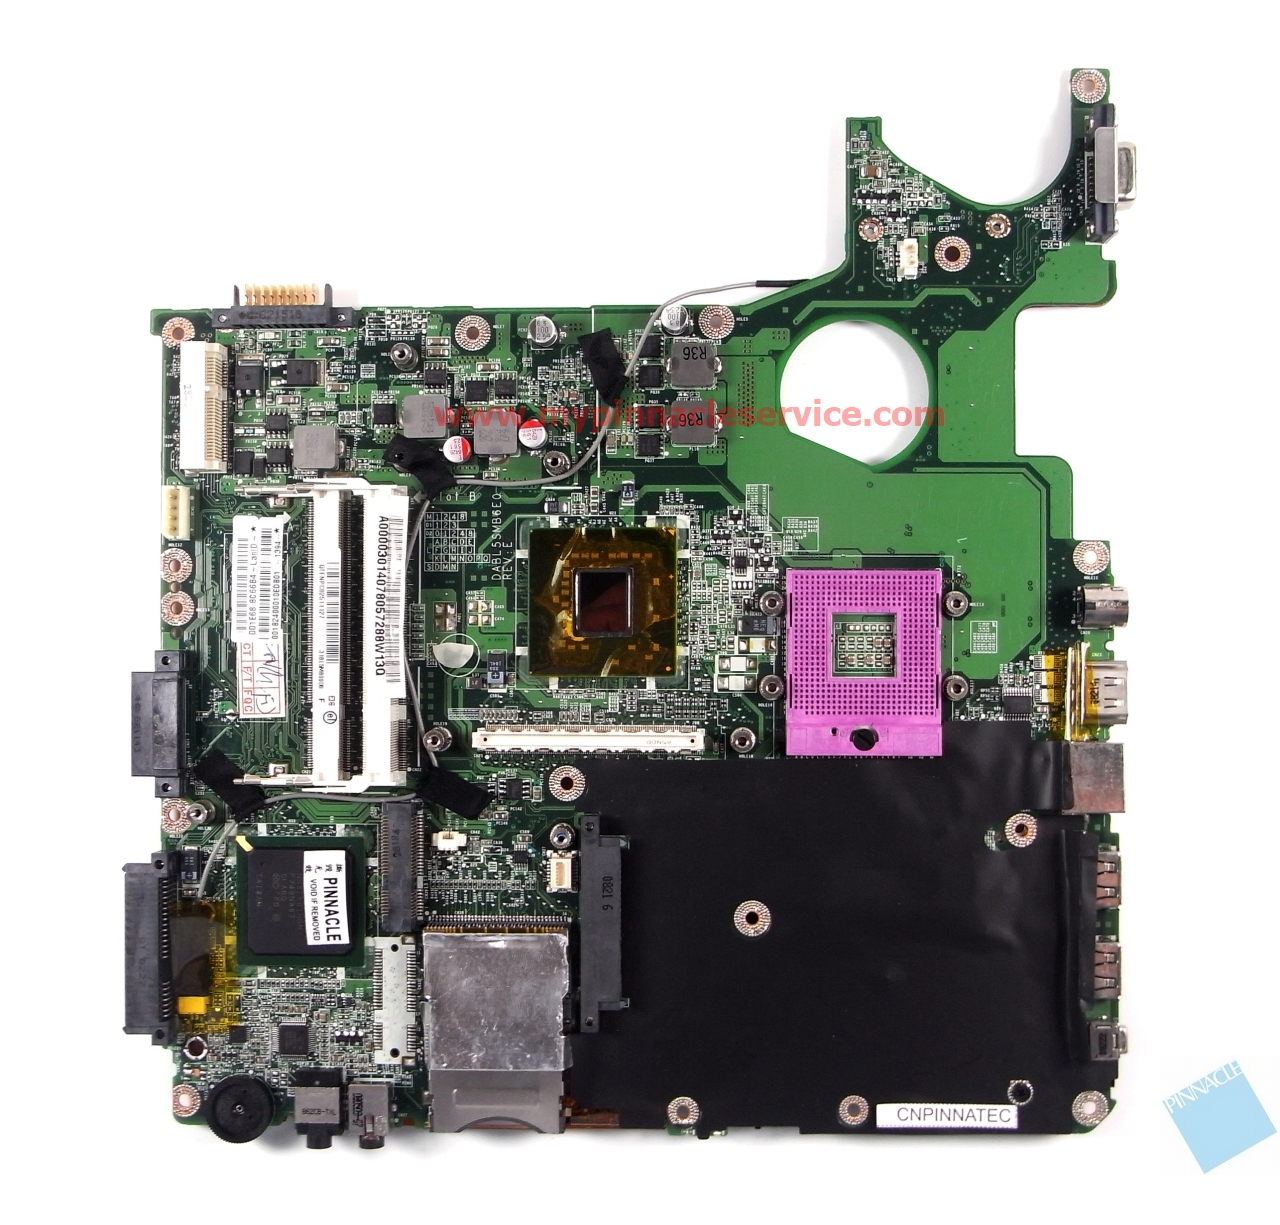 a000040950-a000030140-motherboard-for-toshiba-satellite-a300-p300-dabl5smb6e0-31bl5mb00d0-rimg0057.jpg